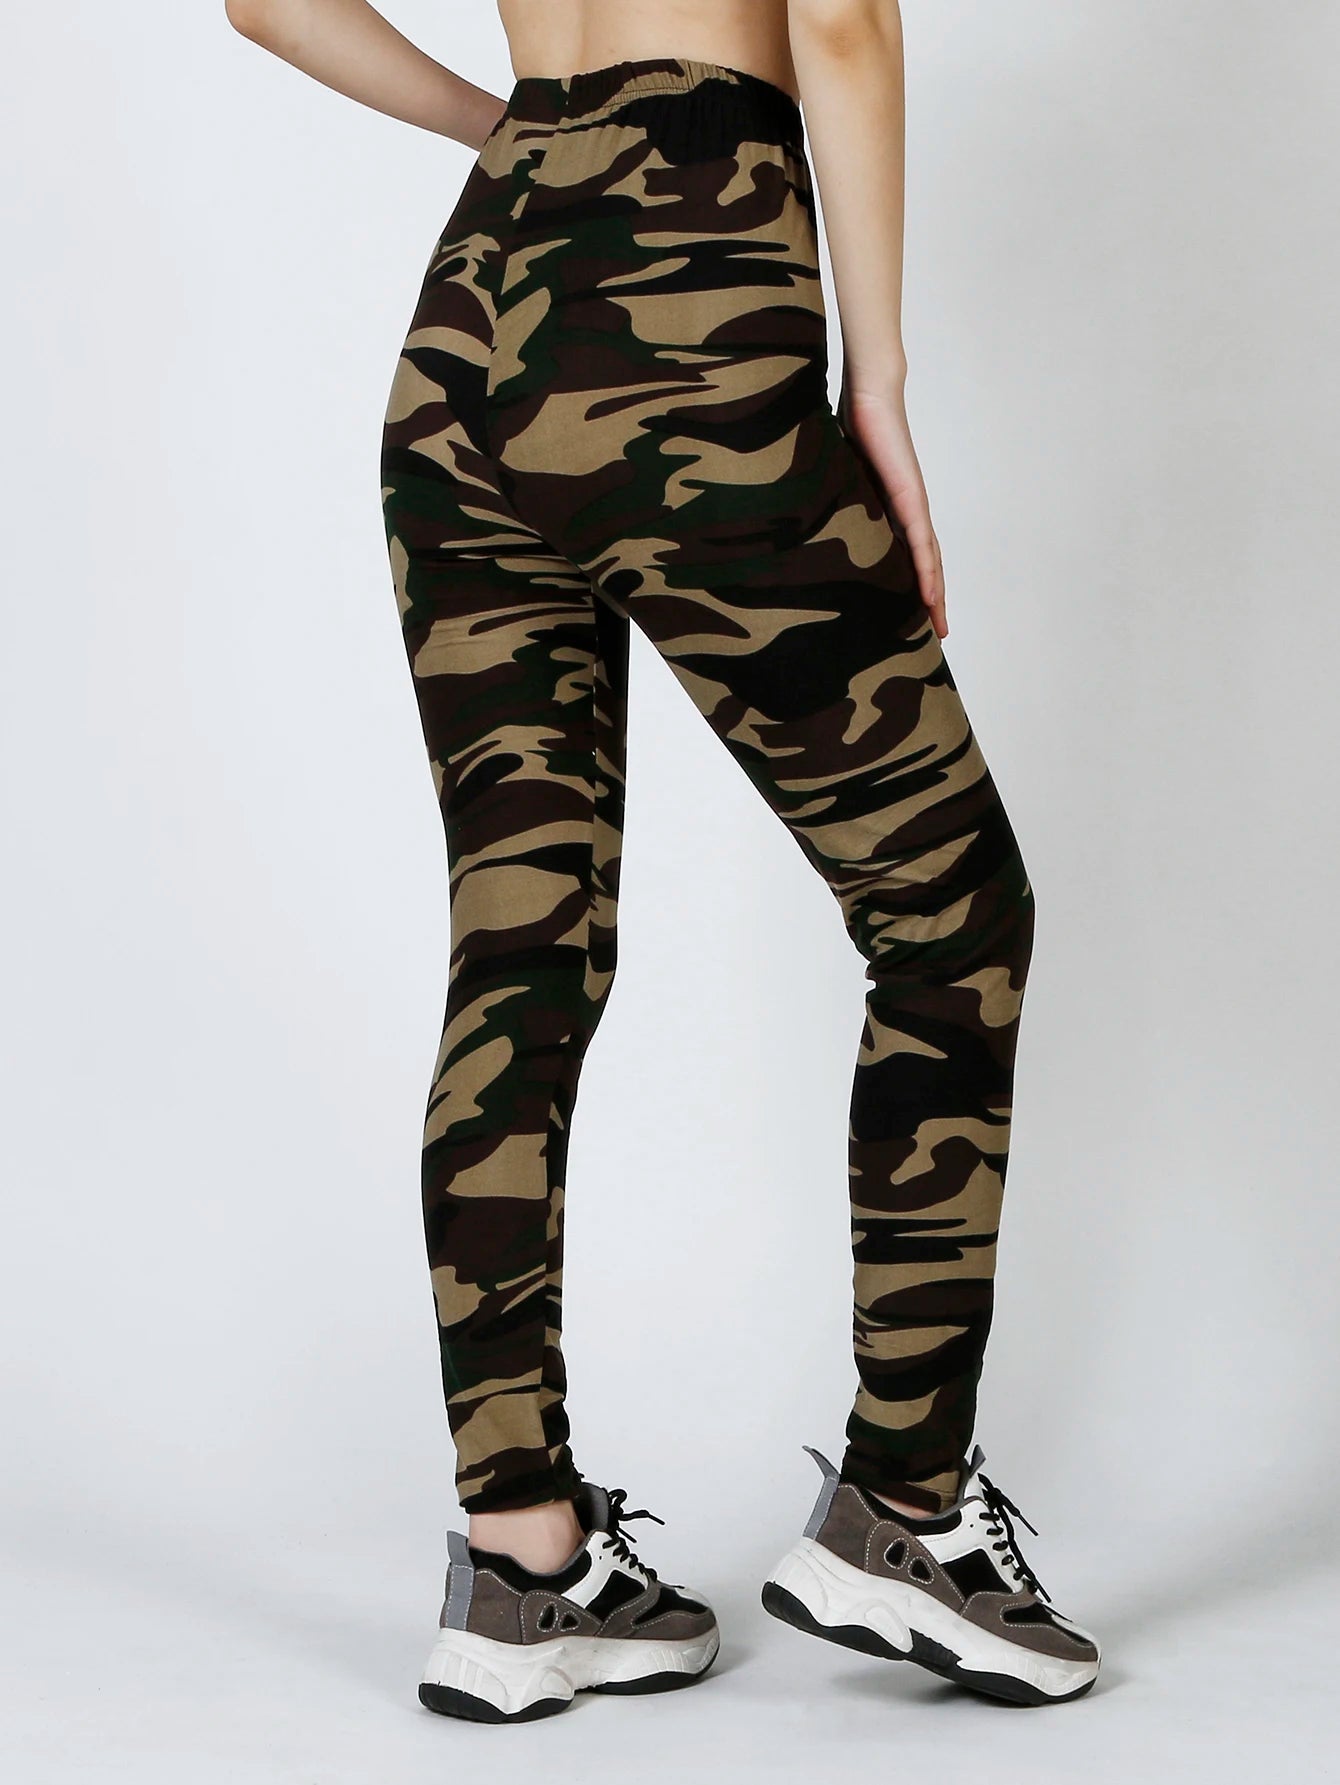 CUHAKCI New Brand Women's Leggings High Elastic Tight Camo Leggings Spring and Autumn Tight Women's Sexy and Charming Casual Pan